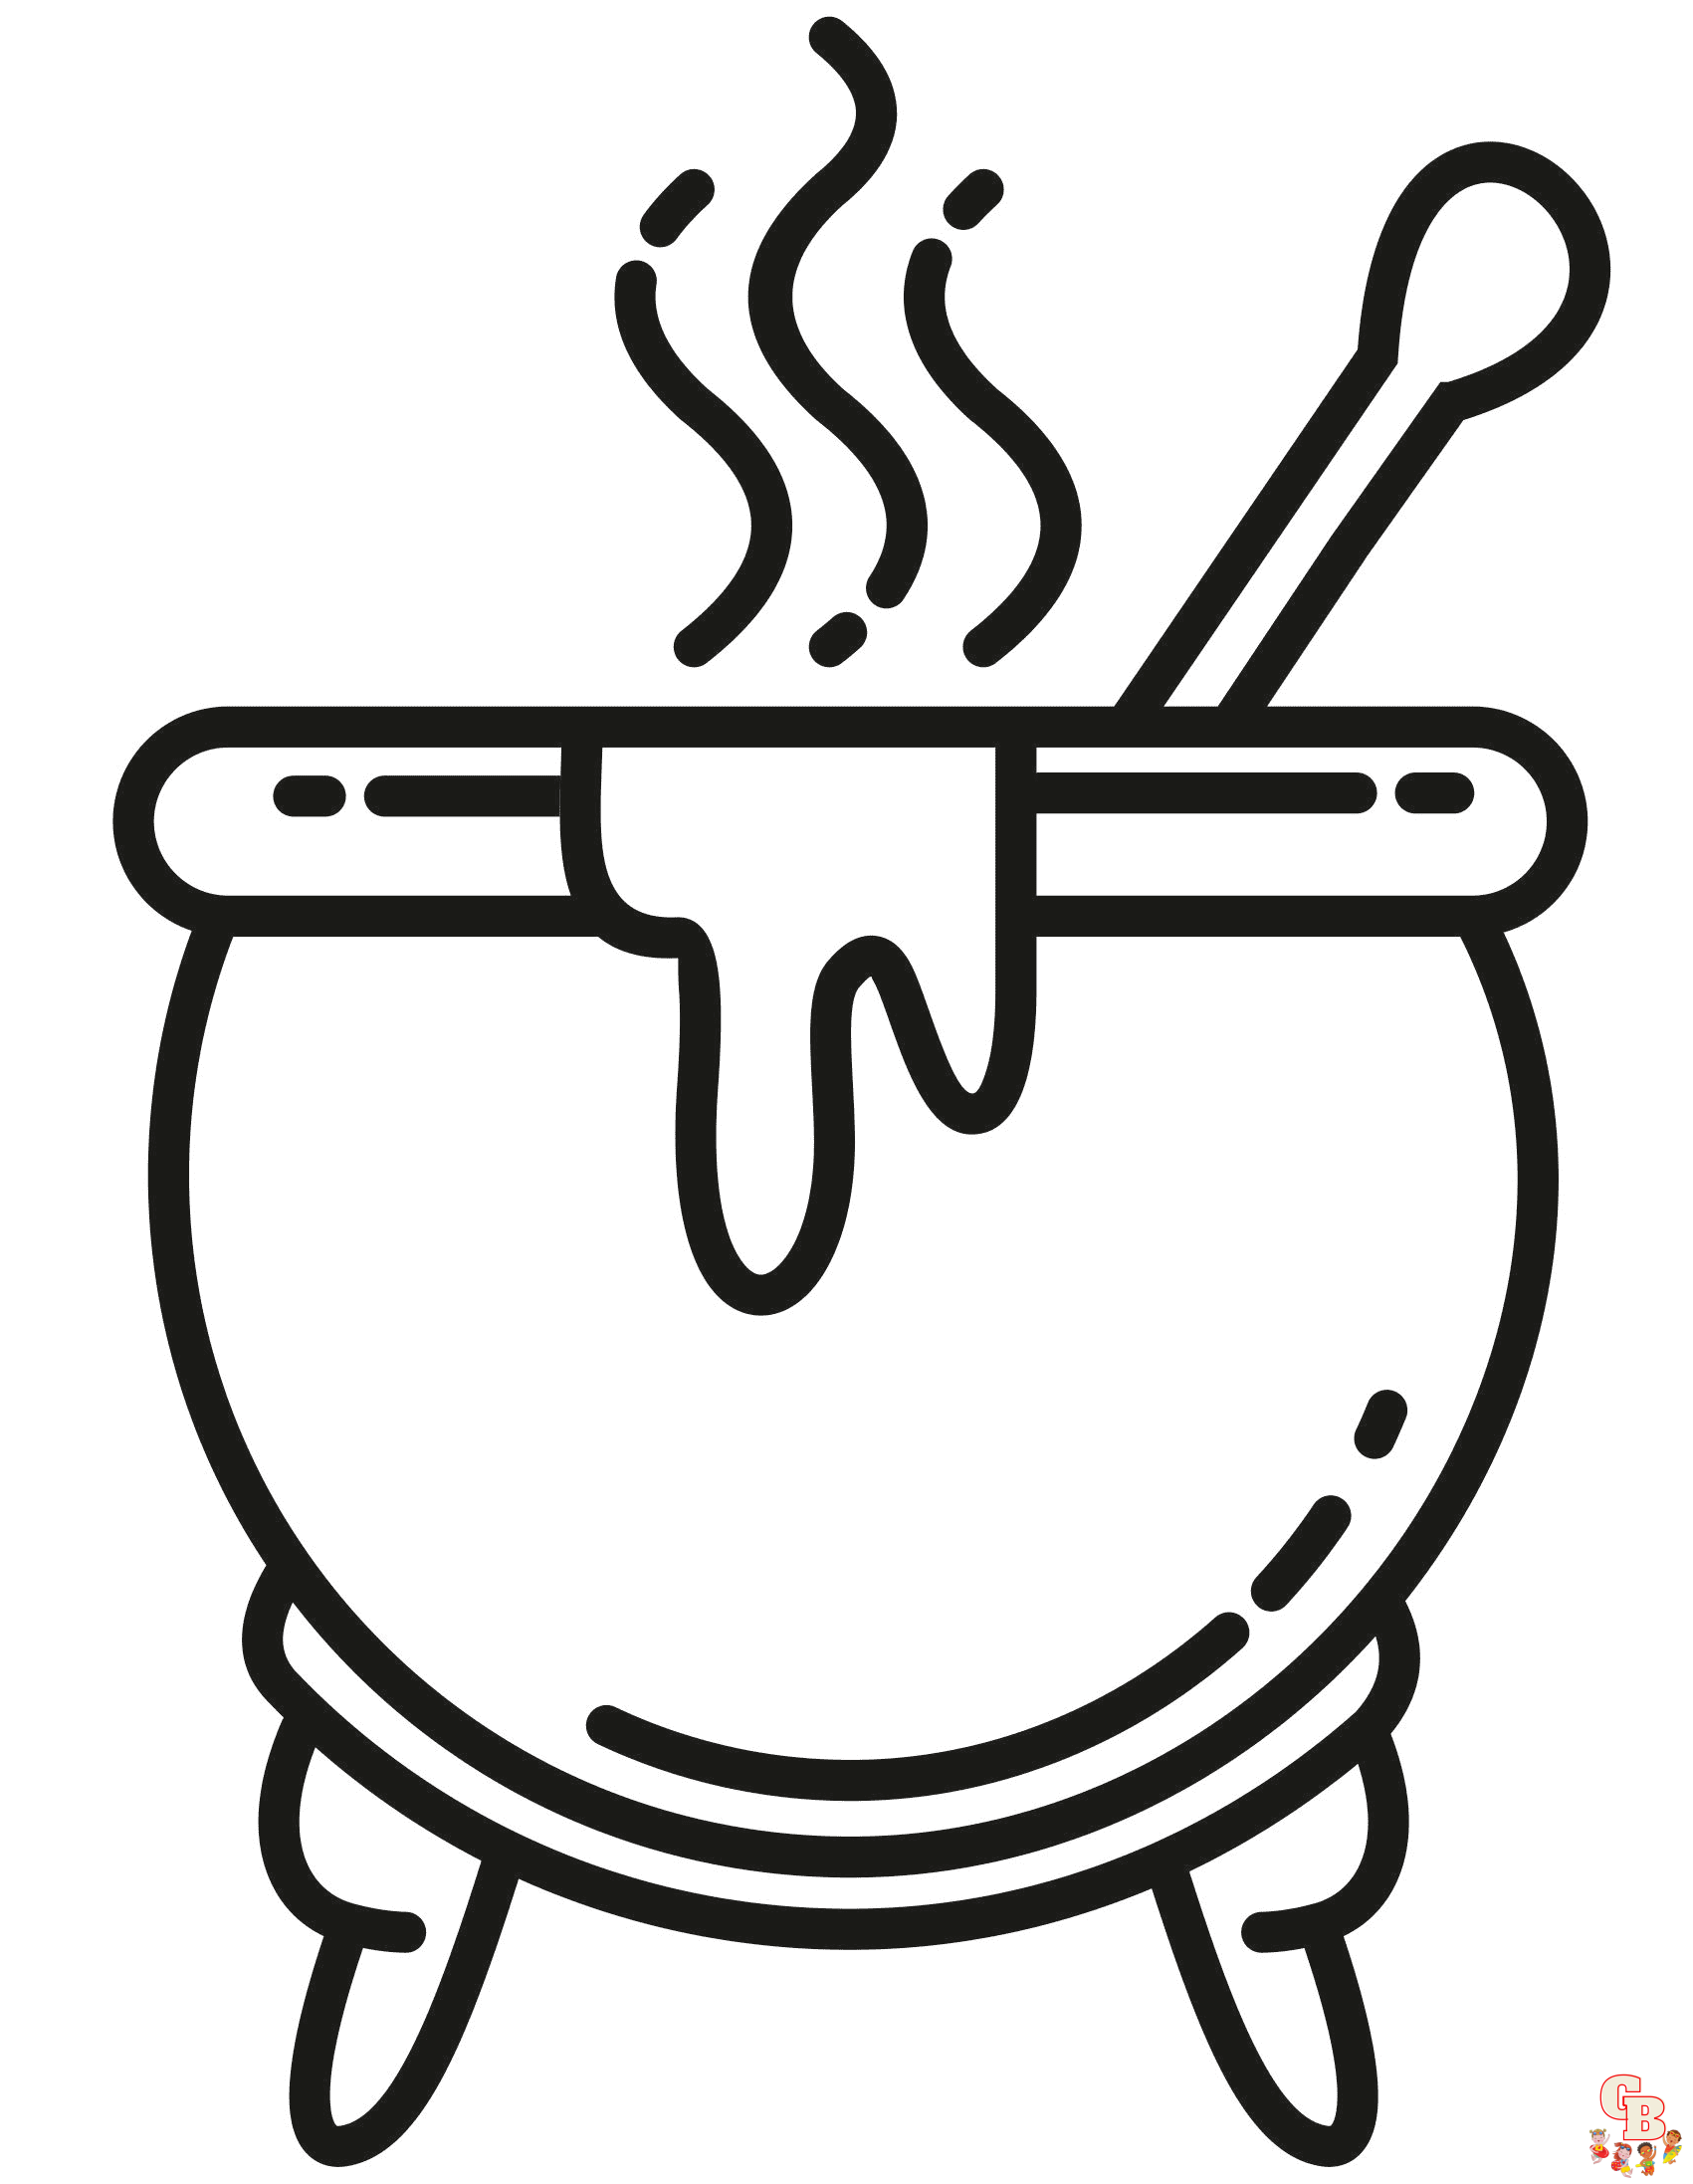 Printable cauldron coloring pages free for kids and adults